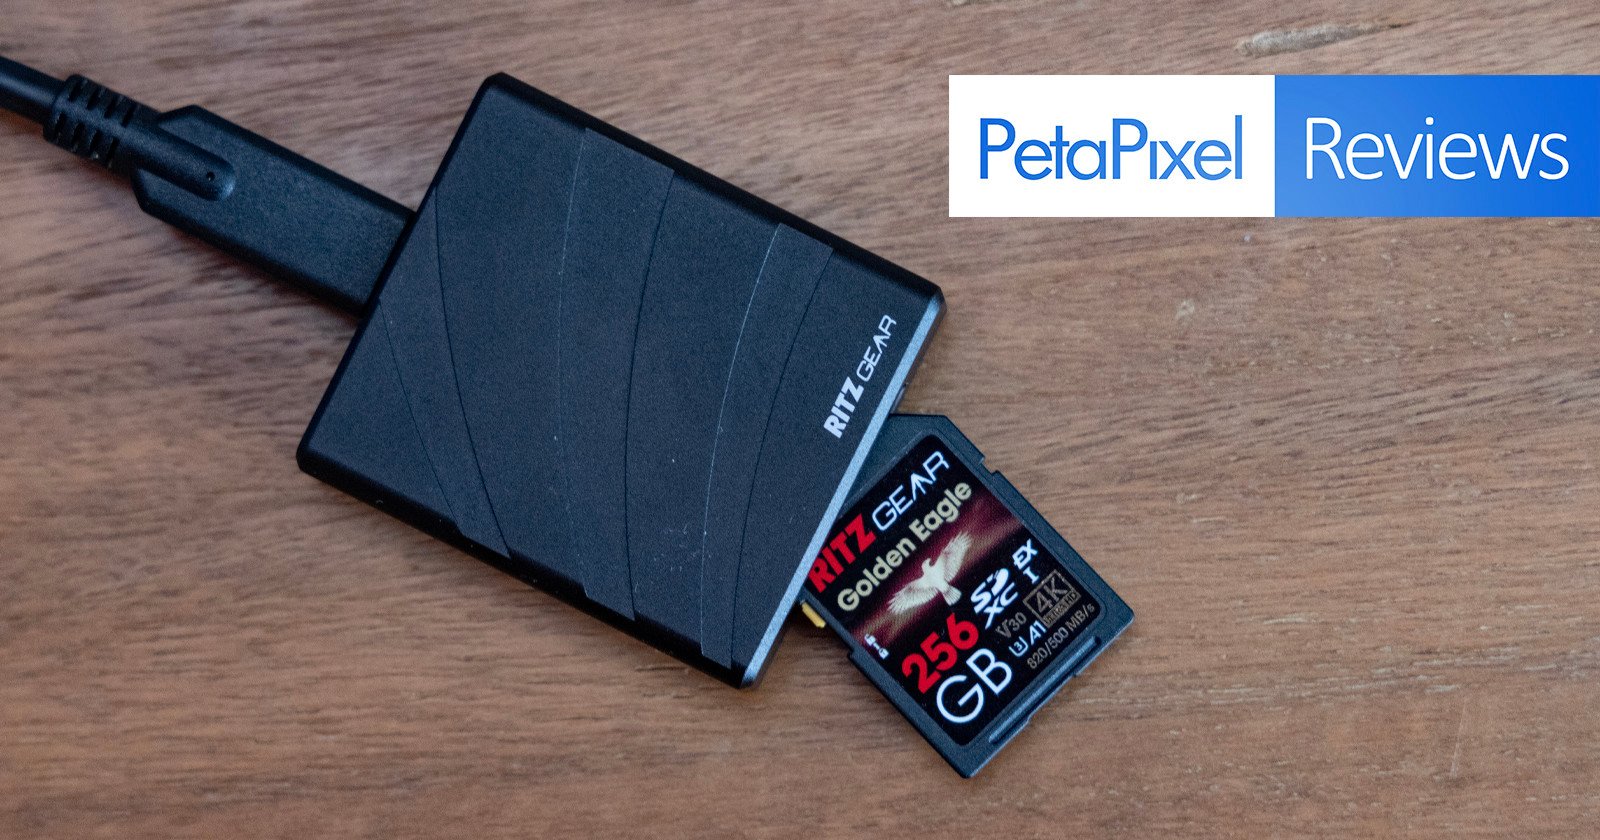 Ritz Golden Eagle SD Express Card Review: It’s Worse Than We Thought